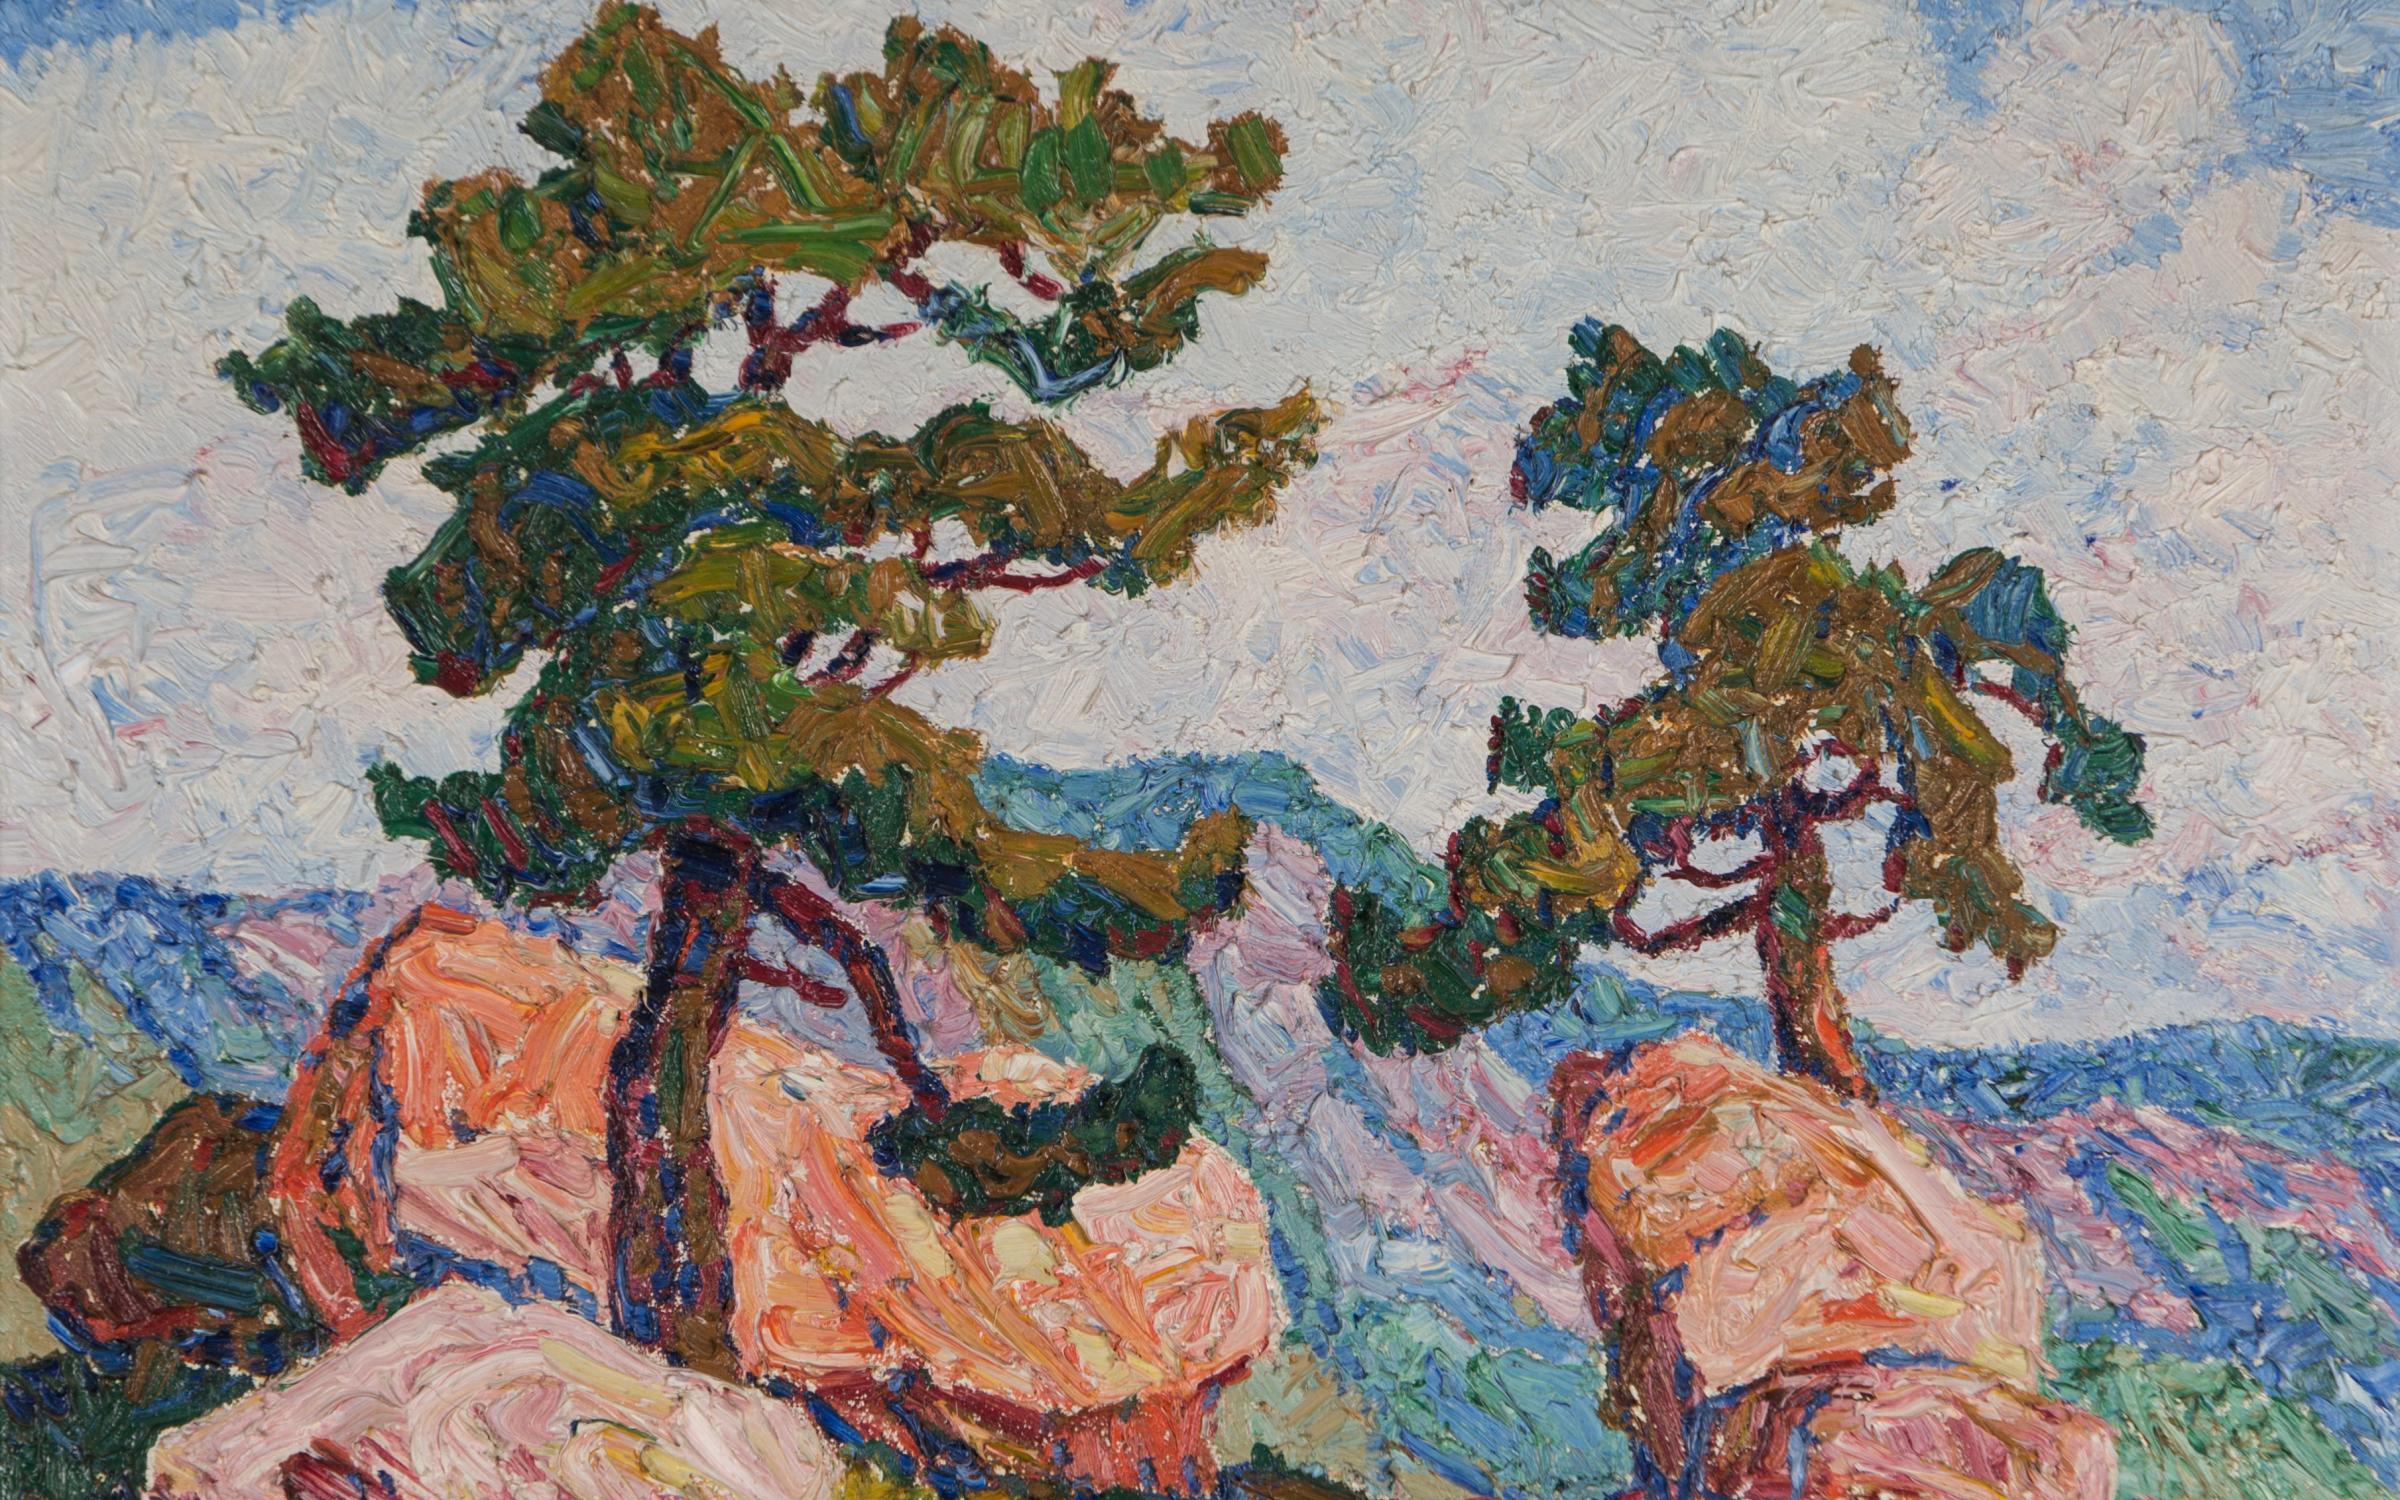  Sven Birger Sandzén, (American, born Sweden, 1871-1954), Two Pines. Manitou, Colorado, 1921, oil on canvas, 17 1/8 x 23 7/8 in., gift of Mr. and Mrs. J.D. Stewart, UMFA2017.4.1.